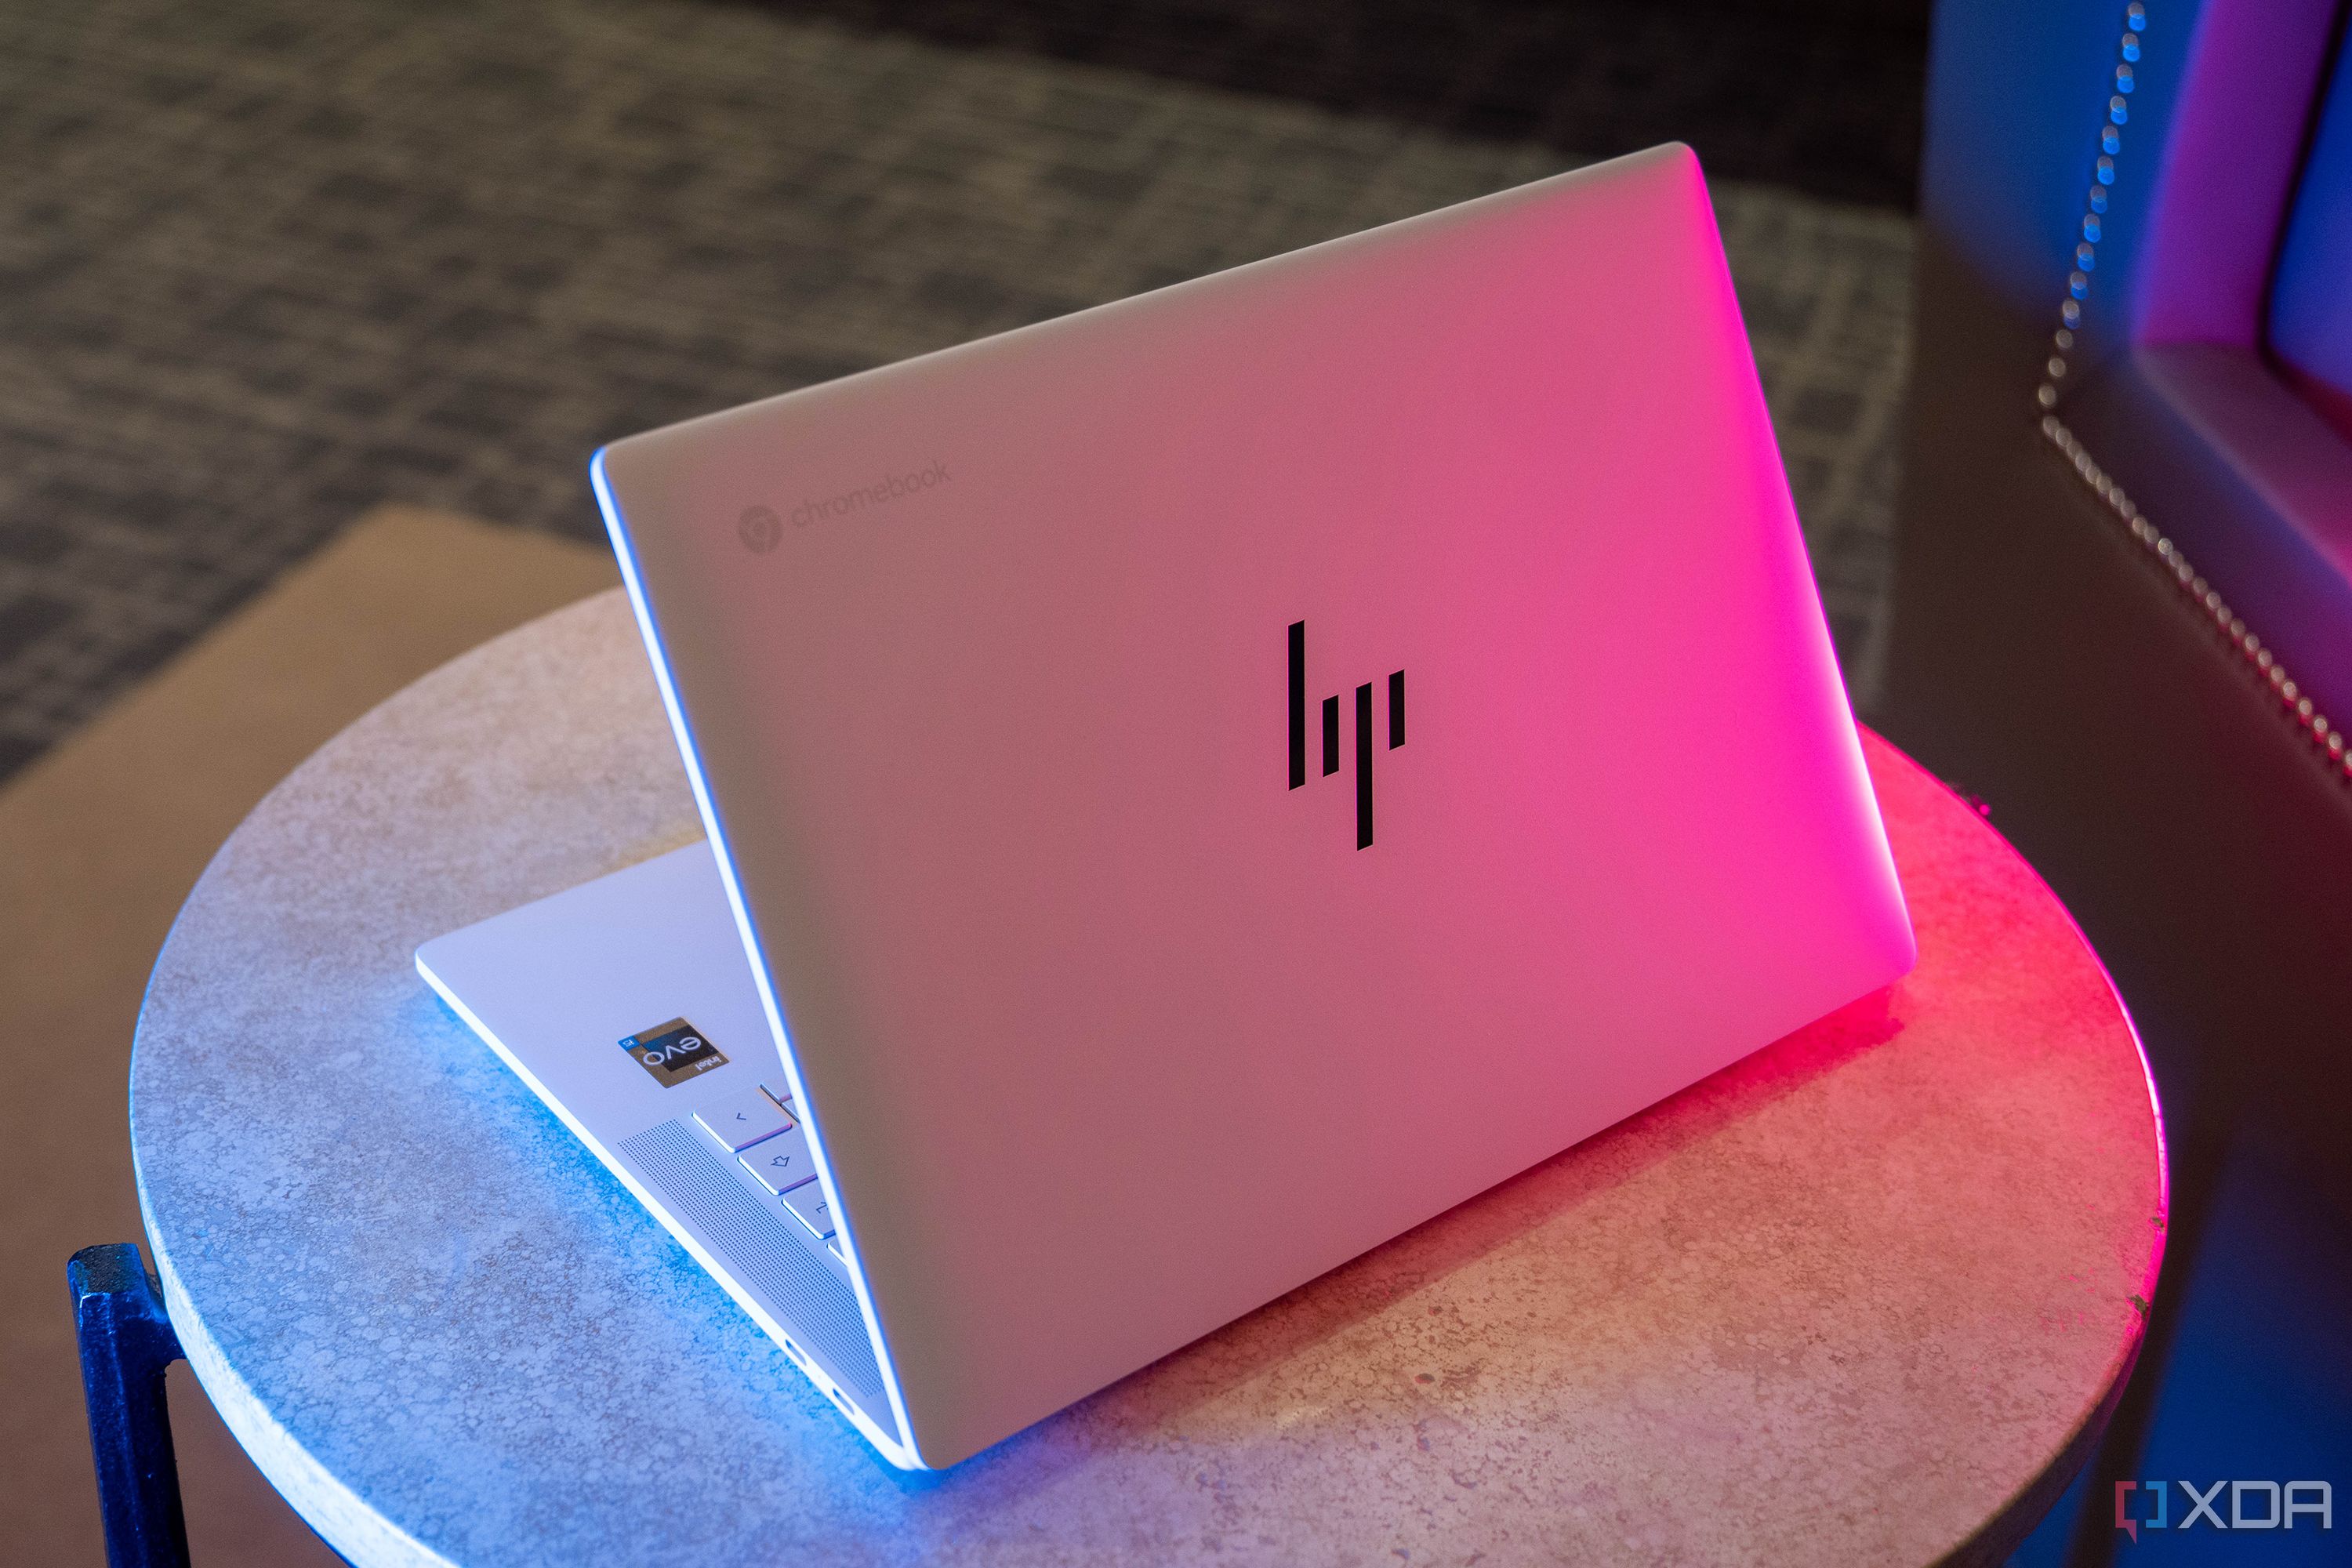 Angled view of white HP laptop